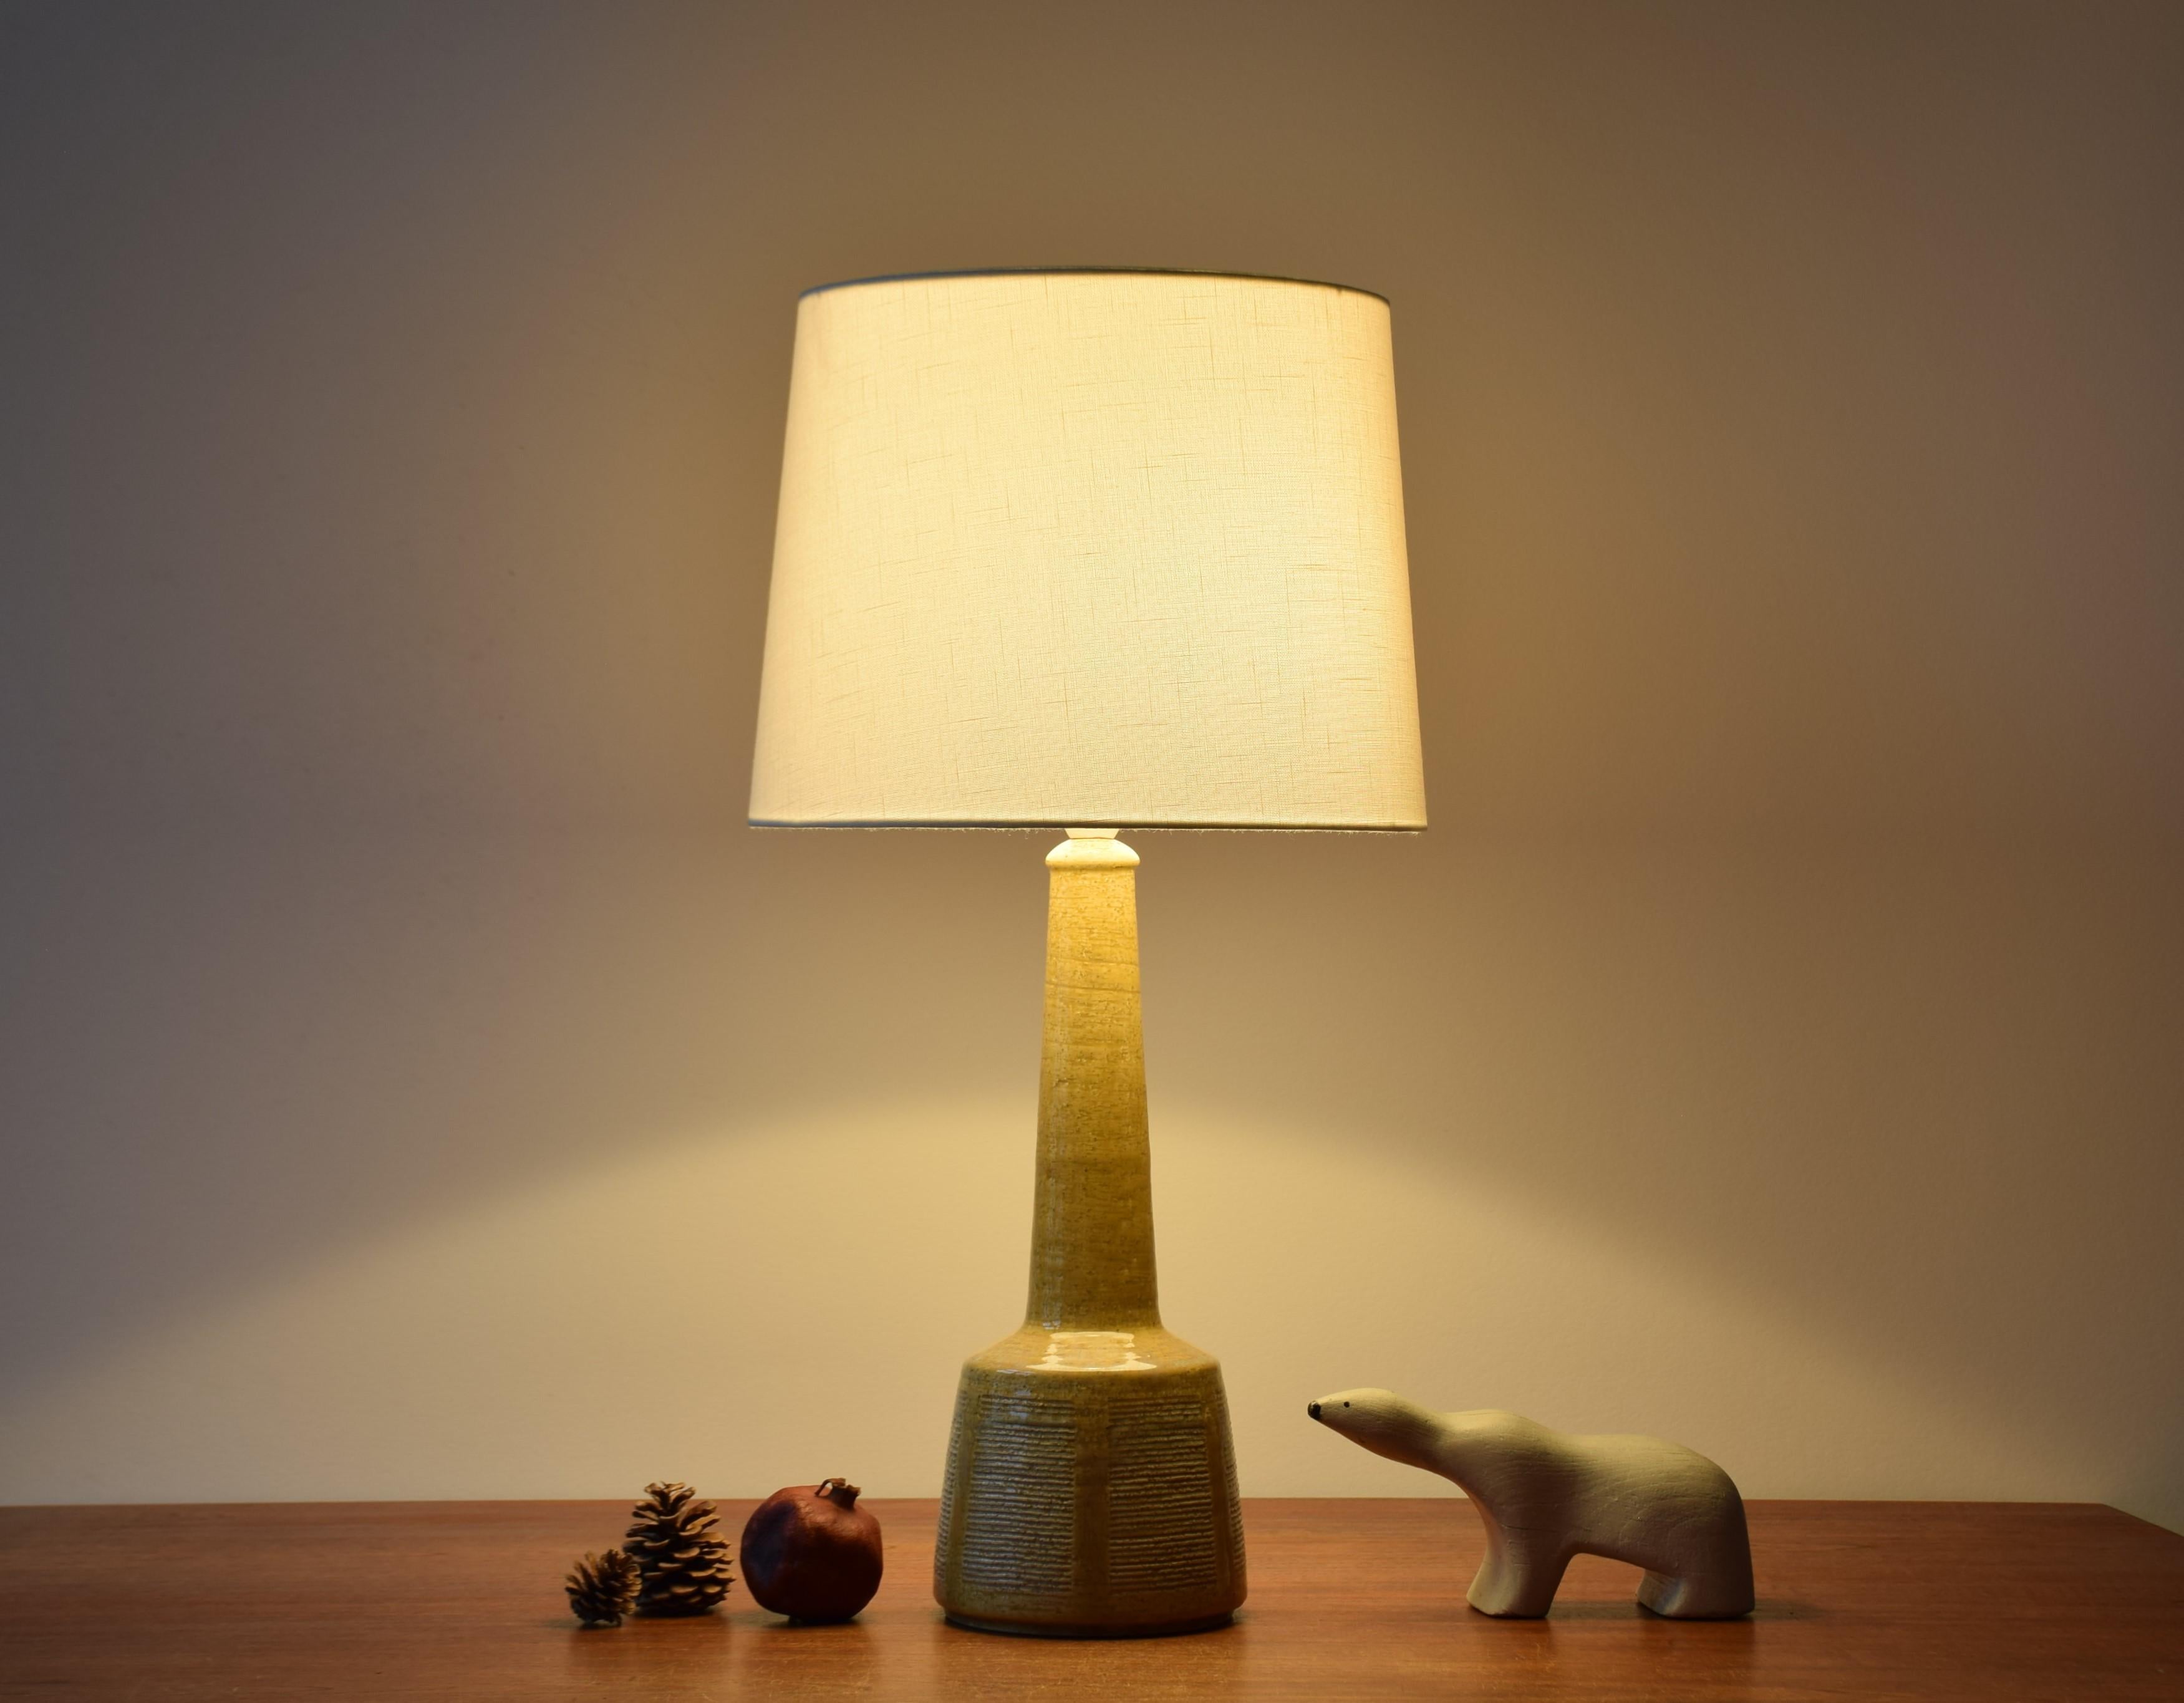 Tall Mid-Century Modern table lamp from Danish ceramic workshop Palshus.
The lamp was designed by Per Linnemann-Schmidt and manufactured circa 1960s.
It is made with chamotte clay which gives a rough and vivid surface. The glaze is yellow with a